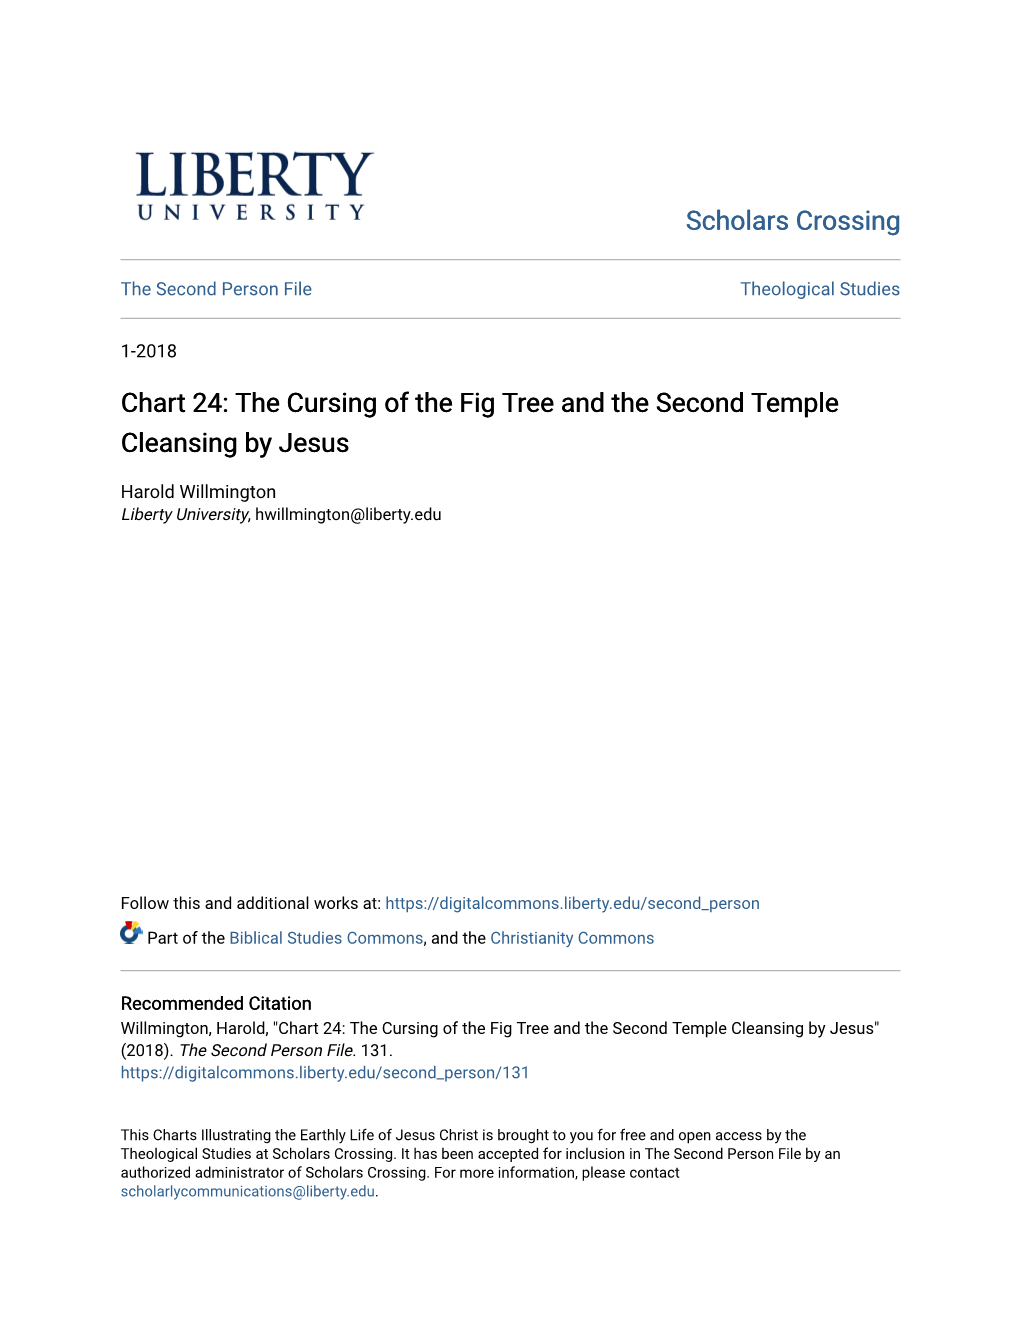 The Cursing of the Fig Tree and the Second Temple Cleansing by Jesus